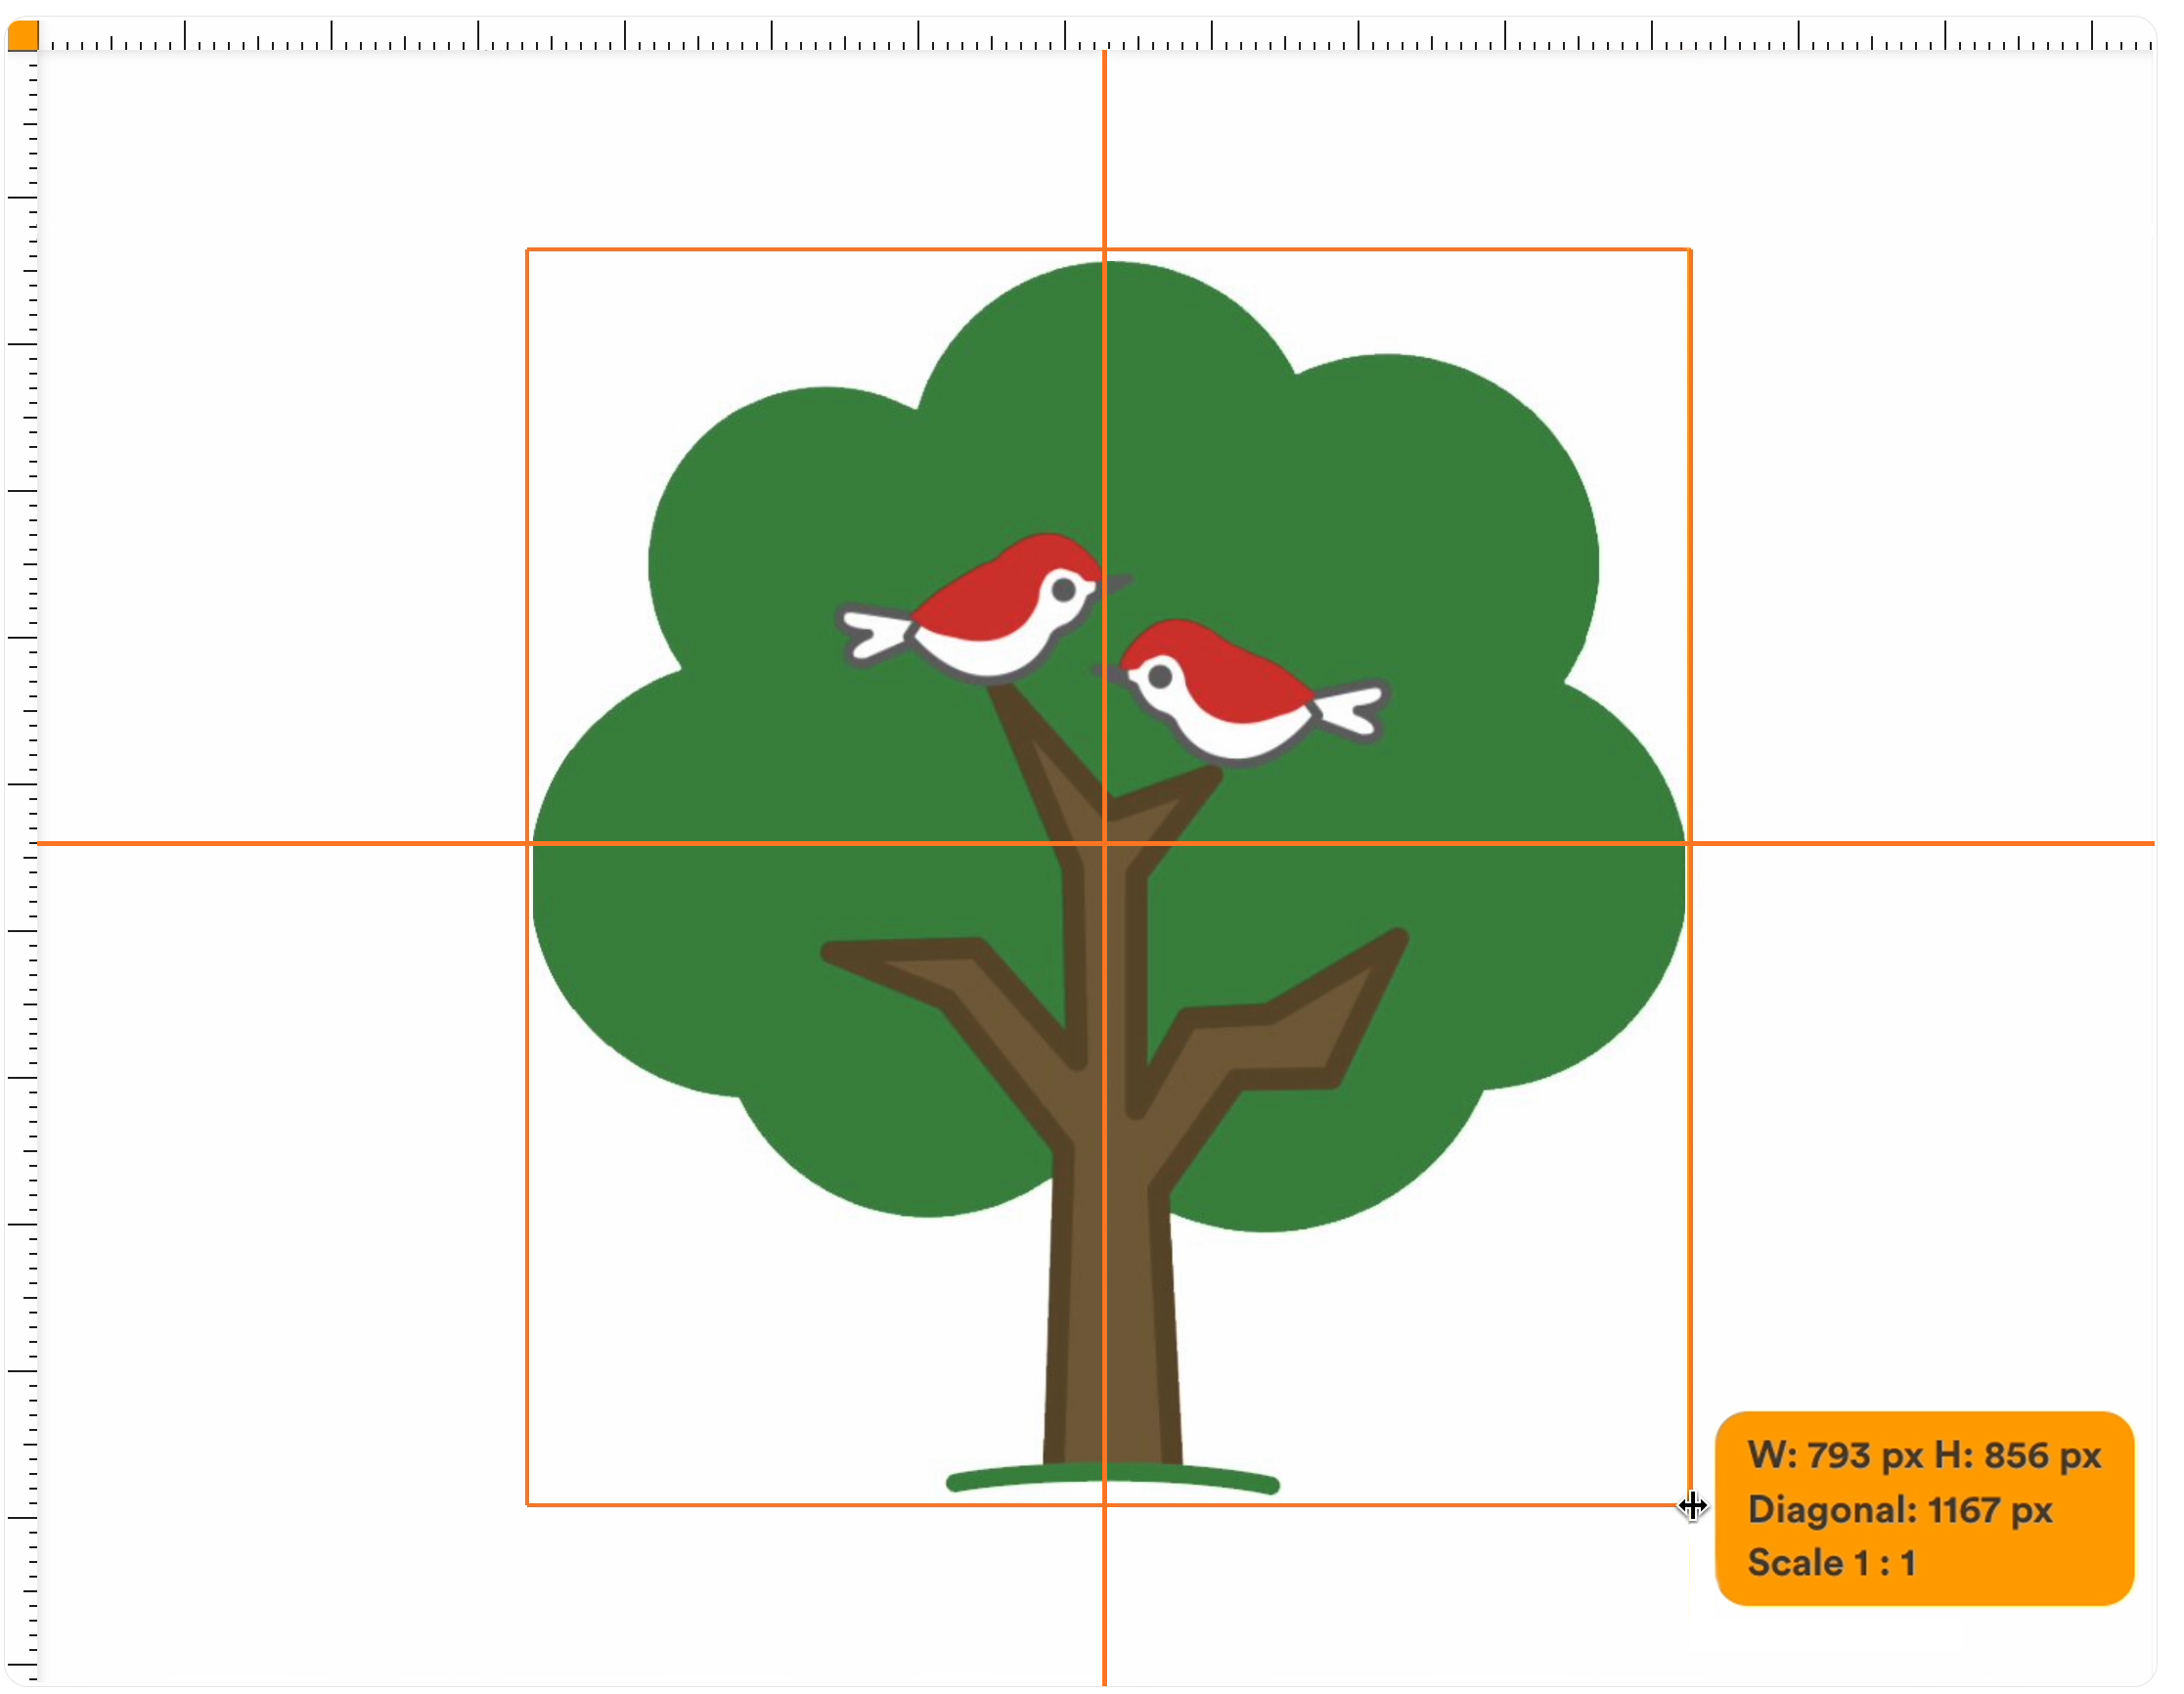 Image of a green tree with two red birds in the branches and orange gridlines and a ruler tool tooltip showing measurements of the tree